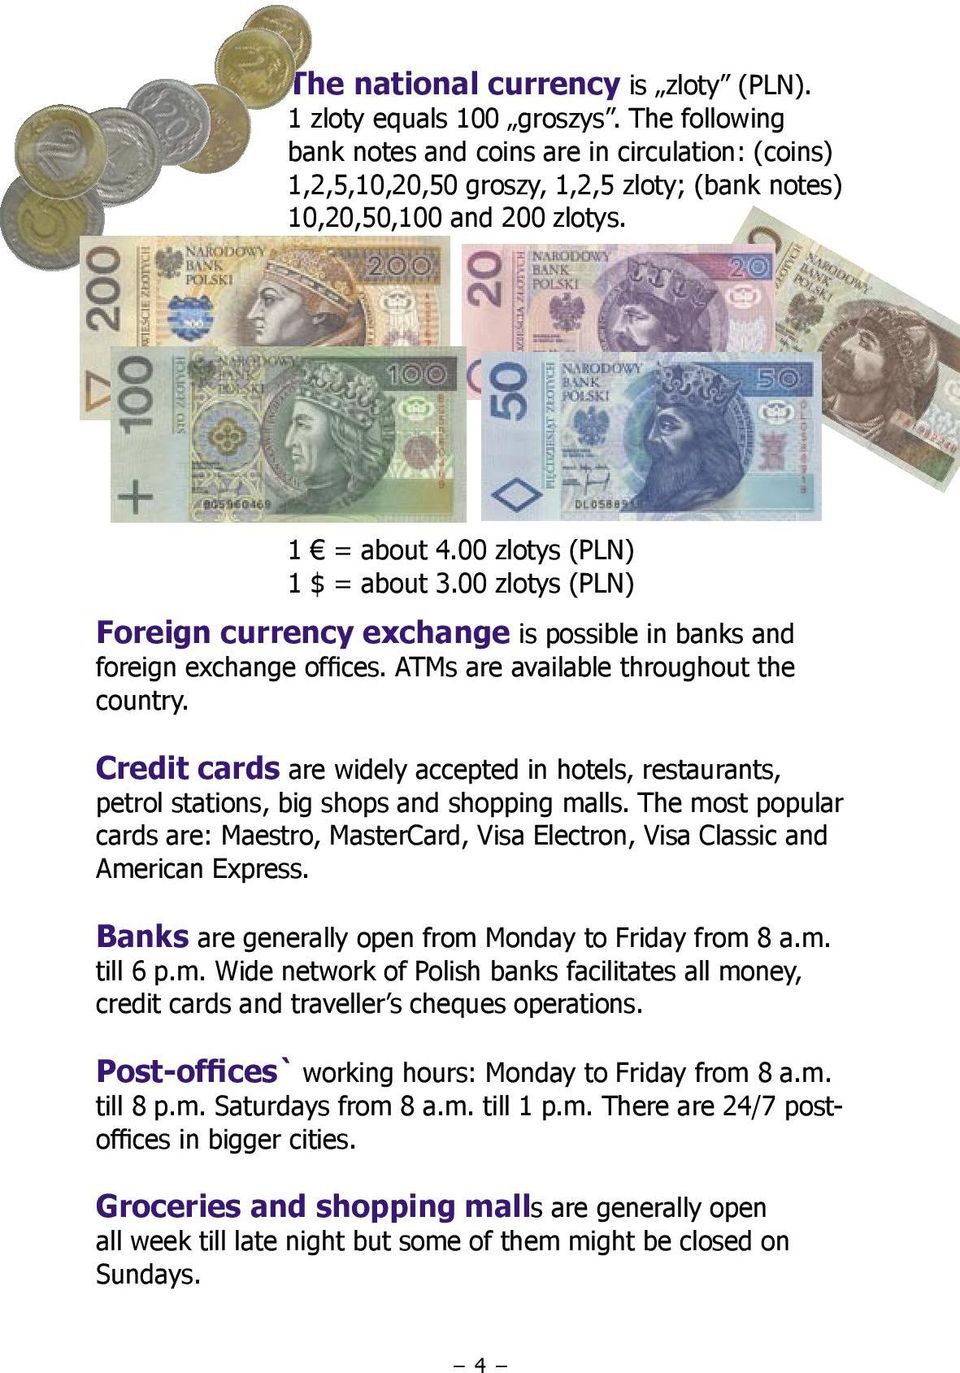 00 zlotys (PLN) Foreign currency exchange is possible in banks and foreign exchange offices. ATMs are available throughout the country.